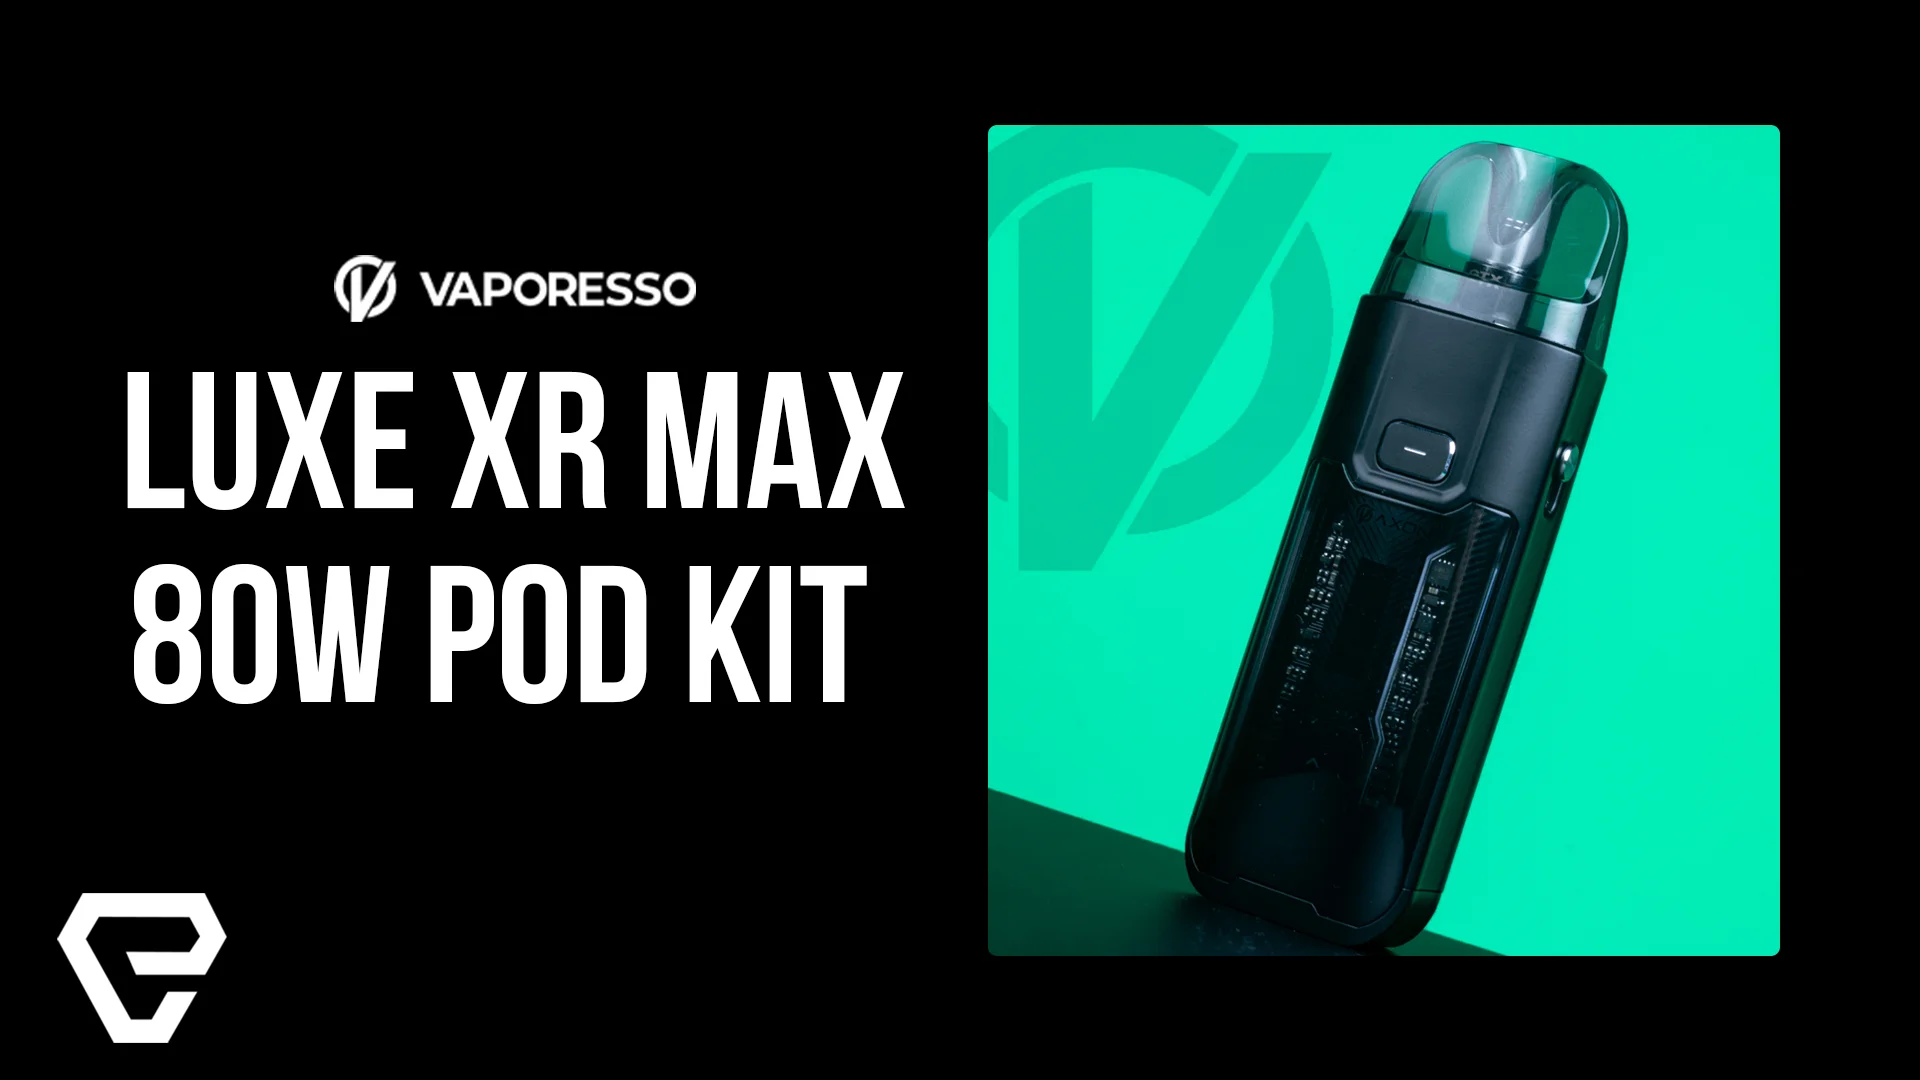 Vape Product Review: Vaporesso Luxe XR Max 80W Pod Kit! on Vimeo